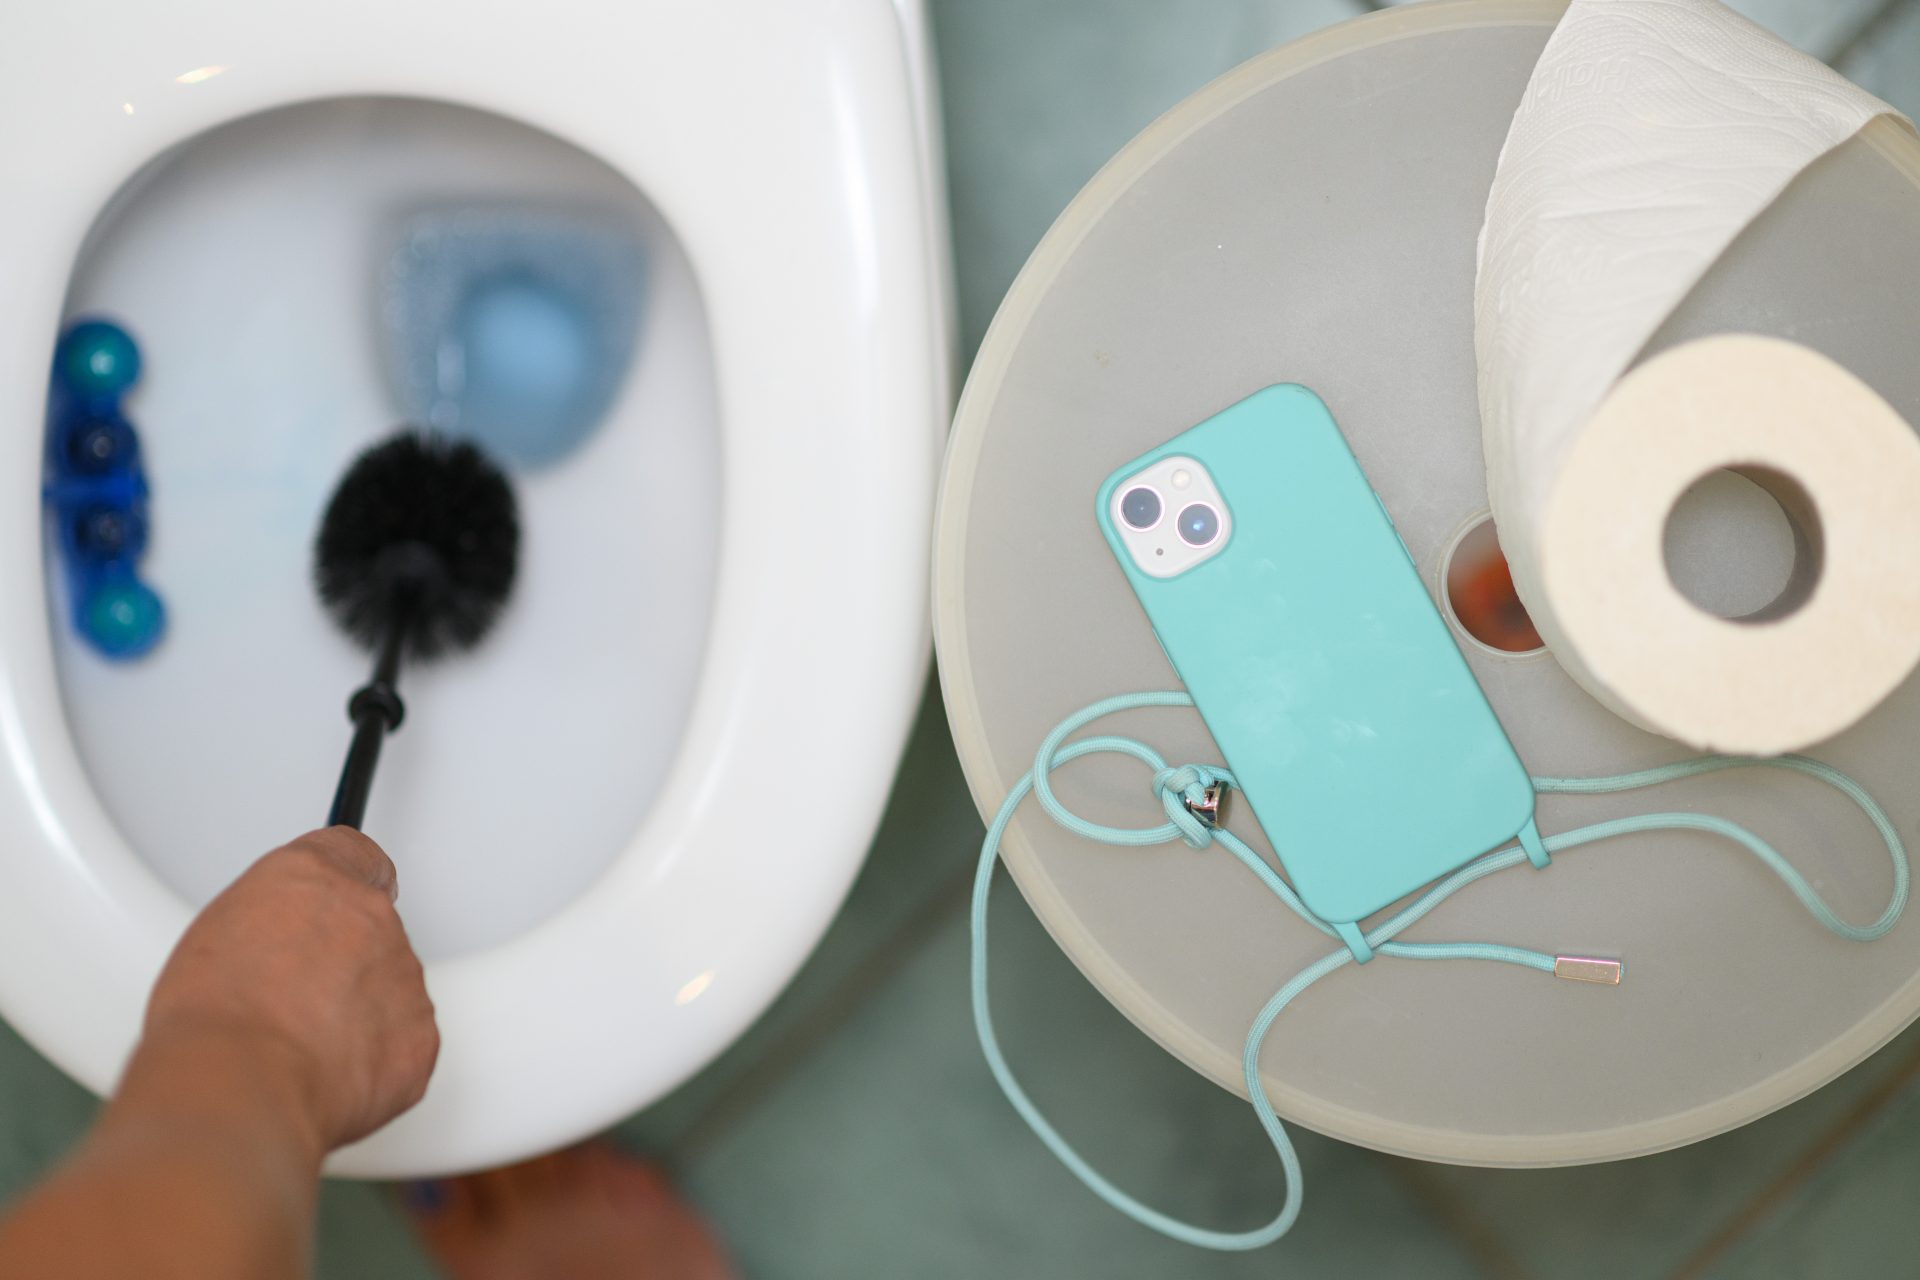 Which has more bacteria, your cell phone or a toilet?